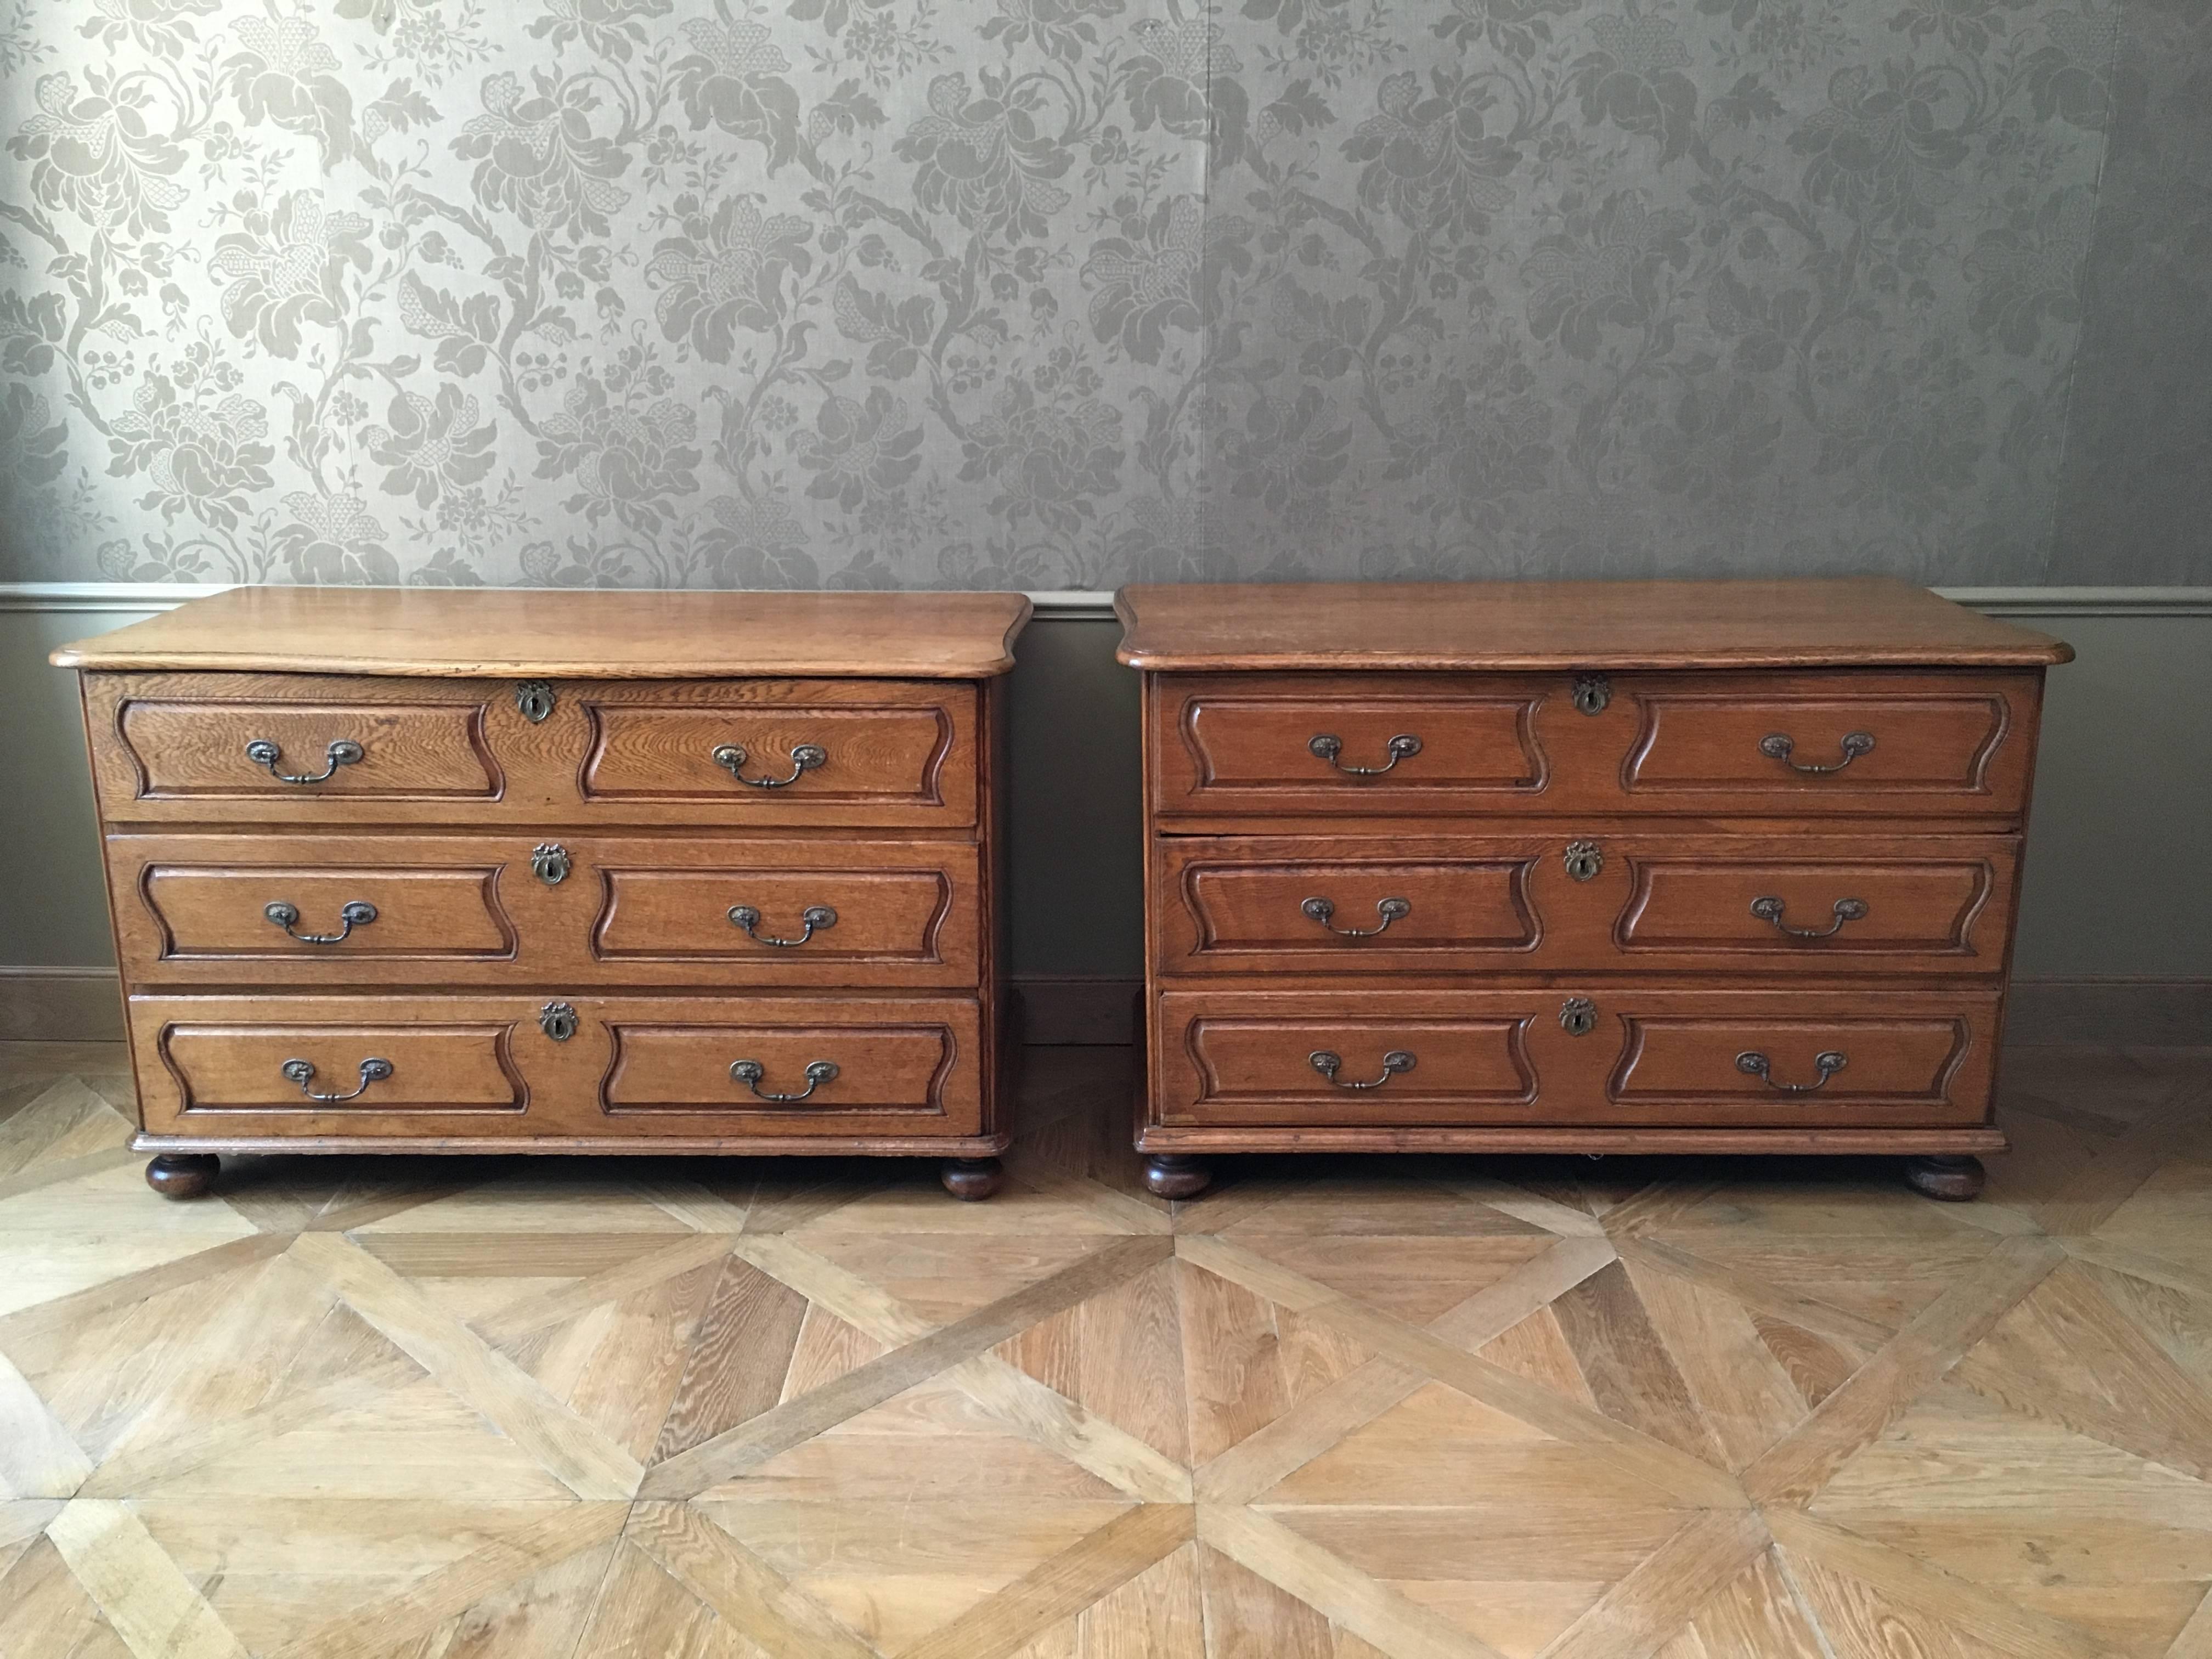 Each with serpentine top, three drawers, with bronze handles on four bun feet. 
Probably Southern Netherlands (Belgium) of Germany.